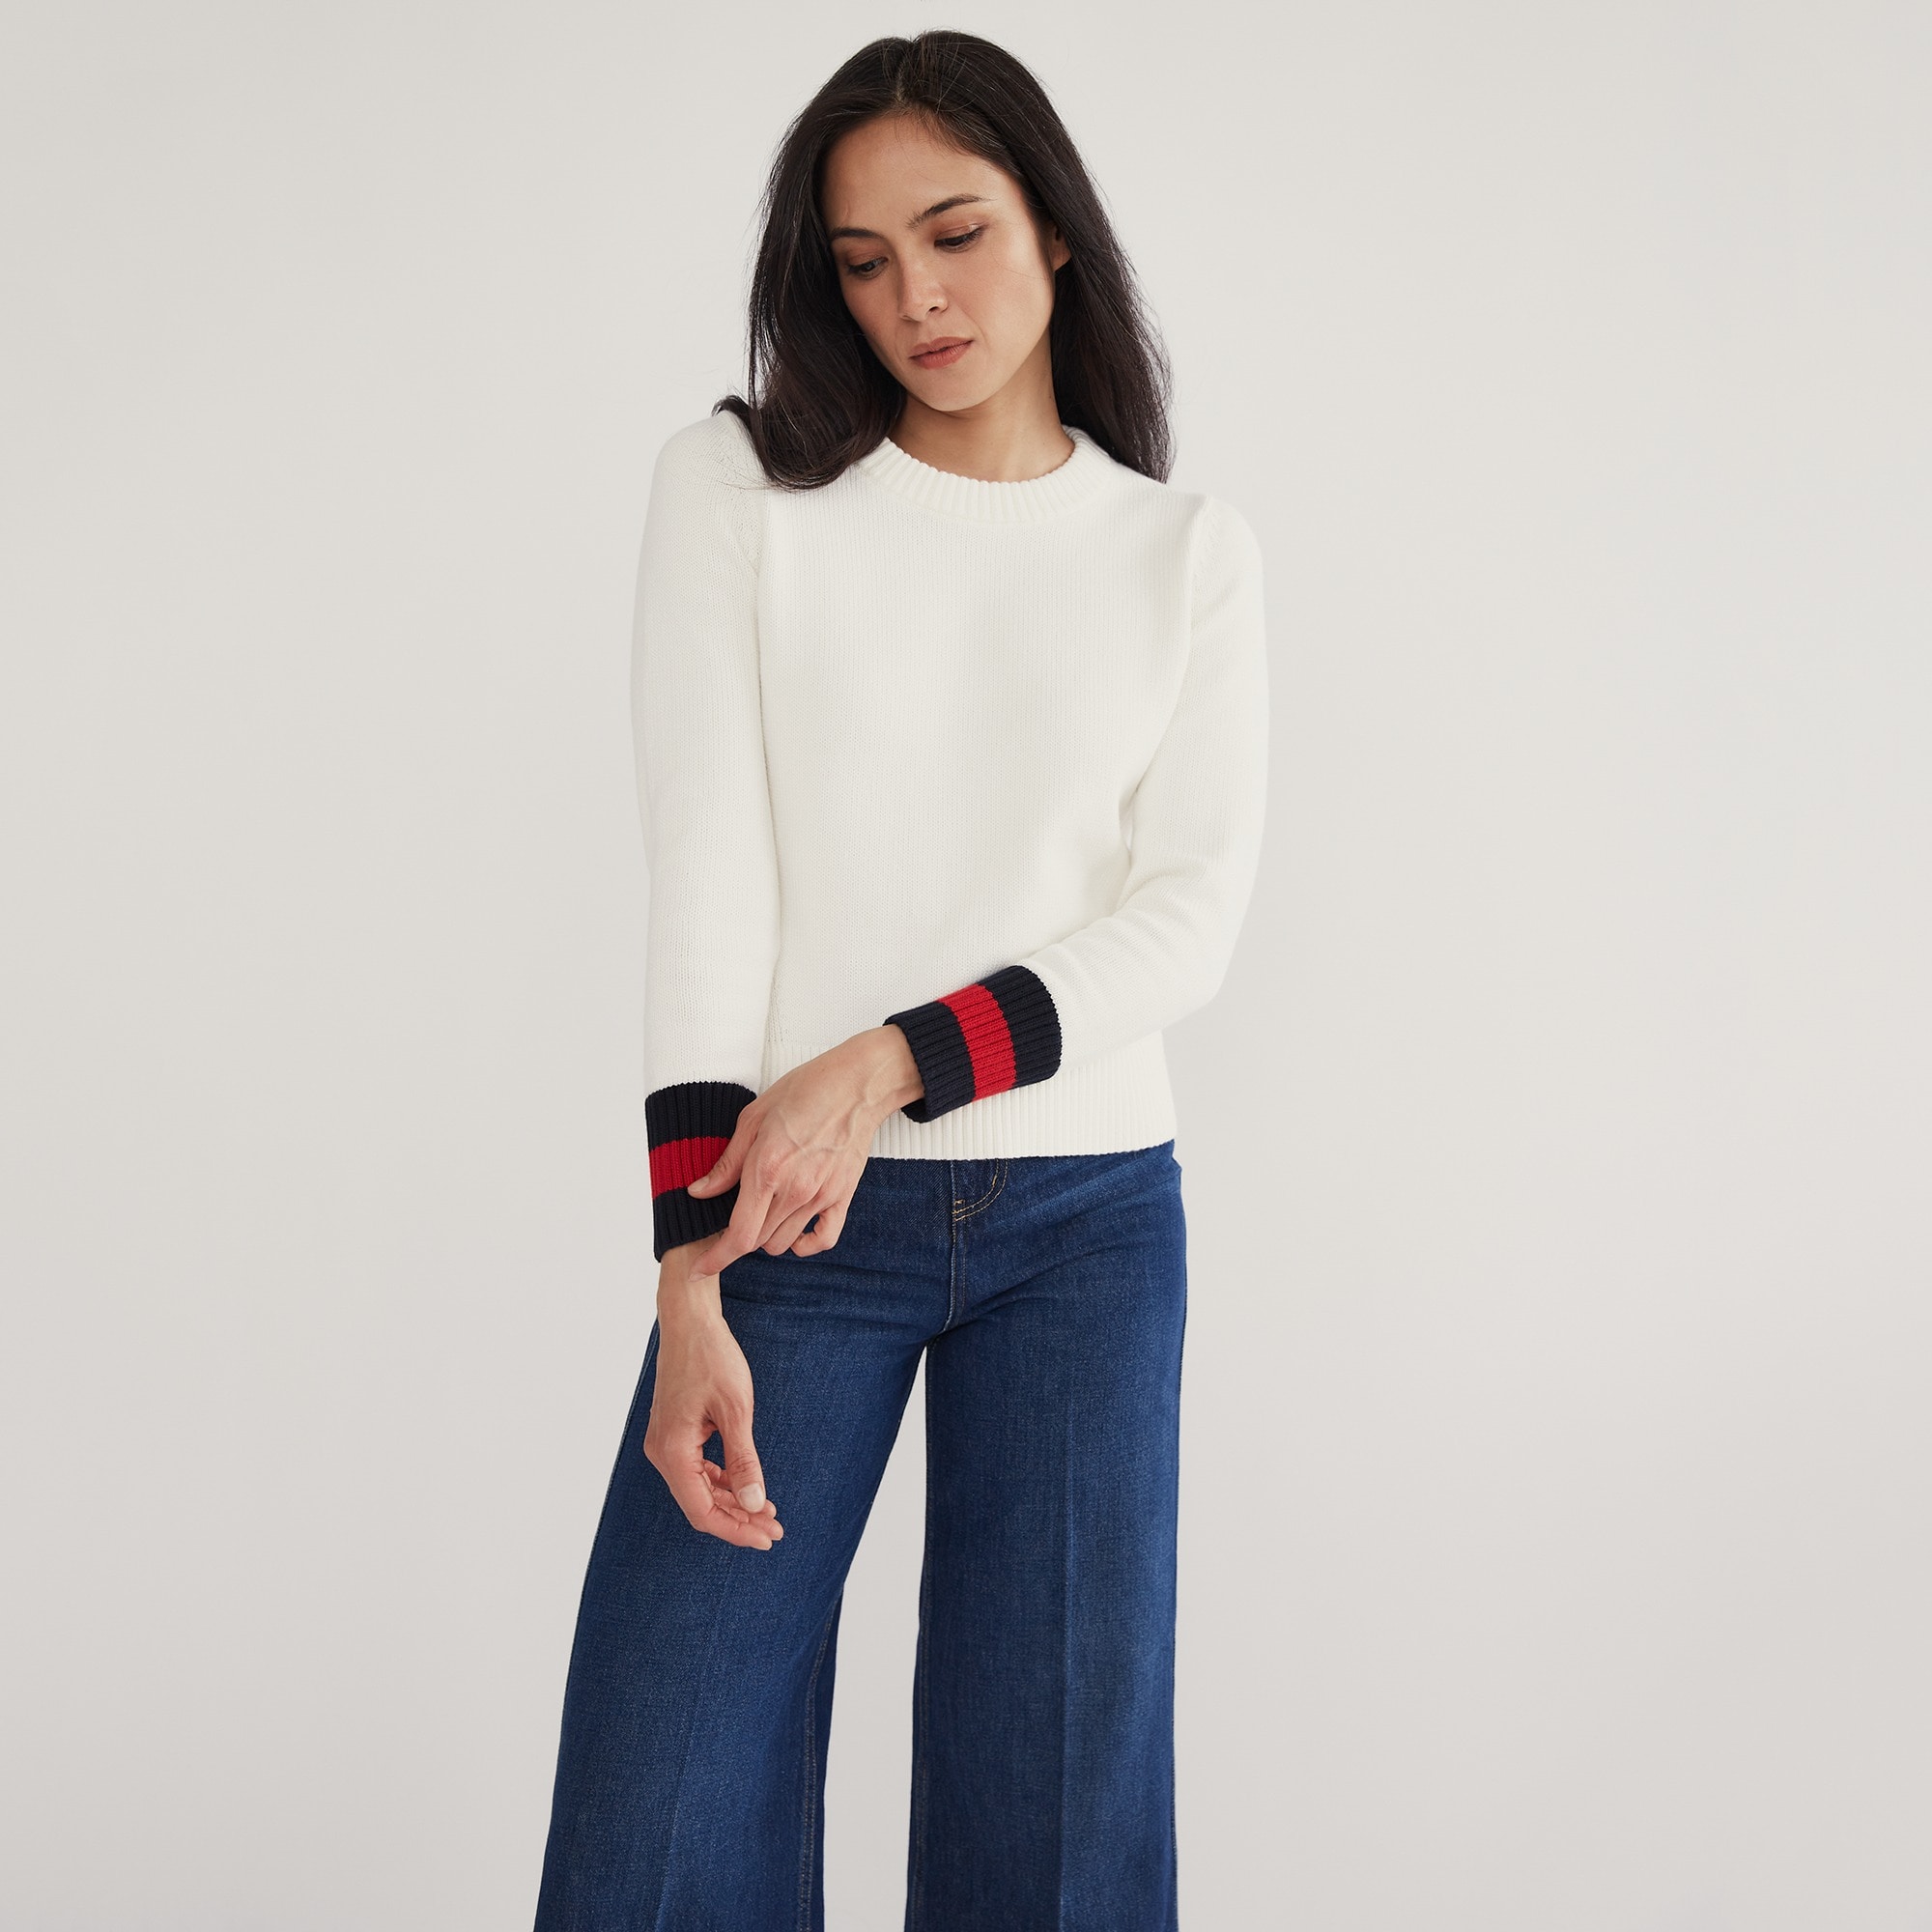  State of Cotton NYC  Castine tipped sweater